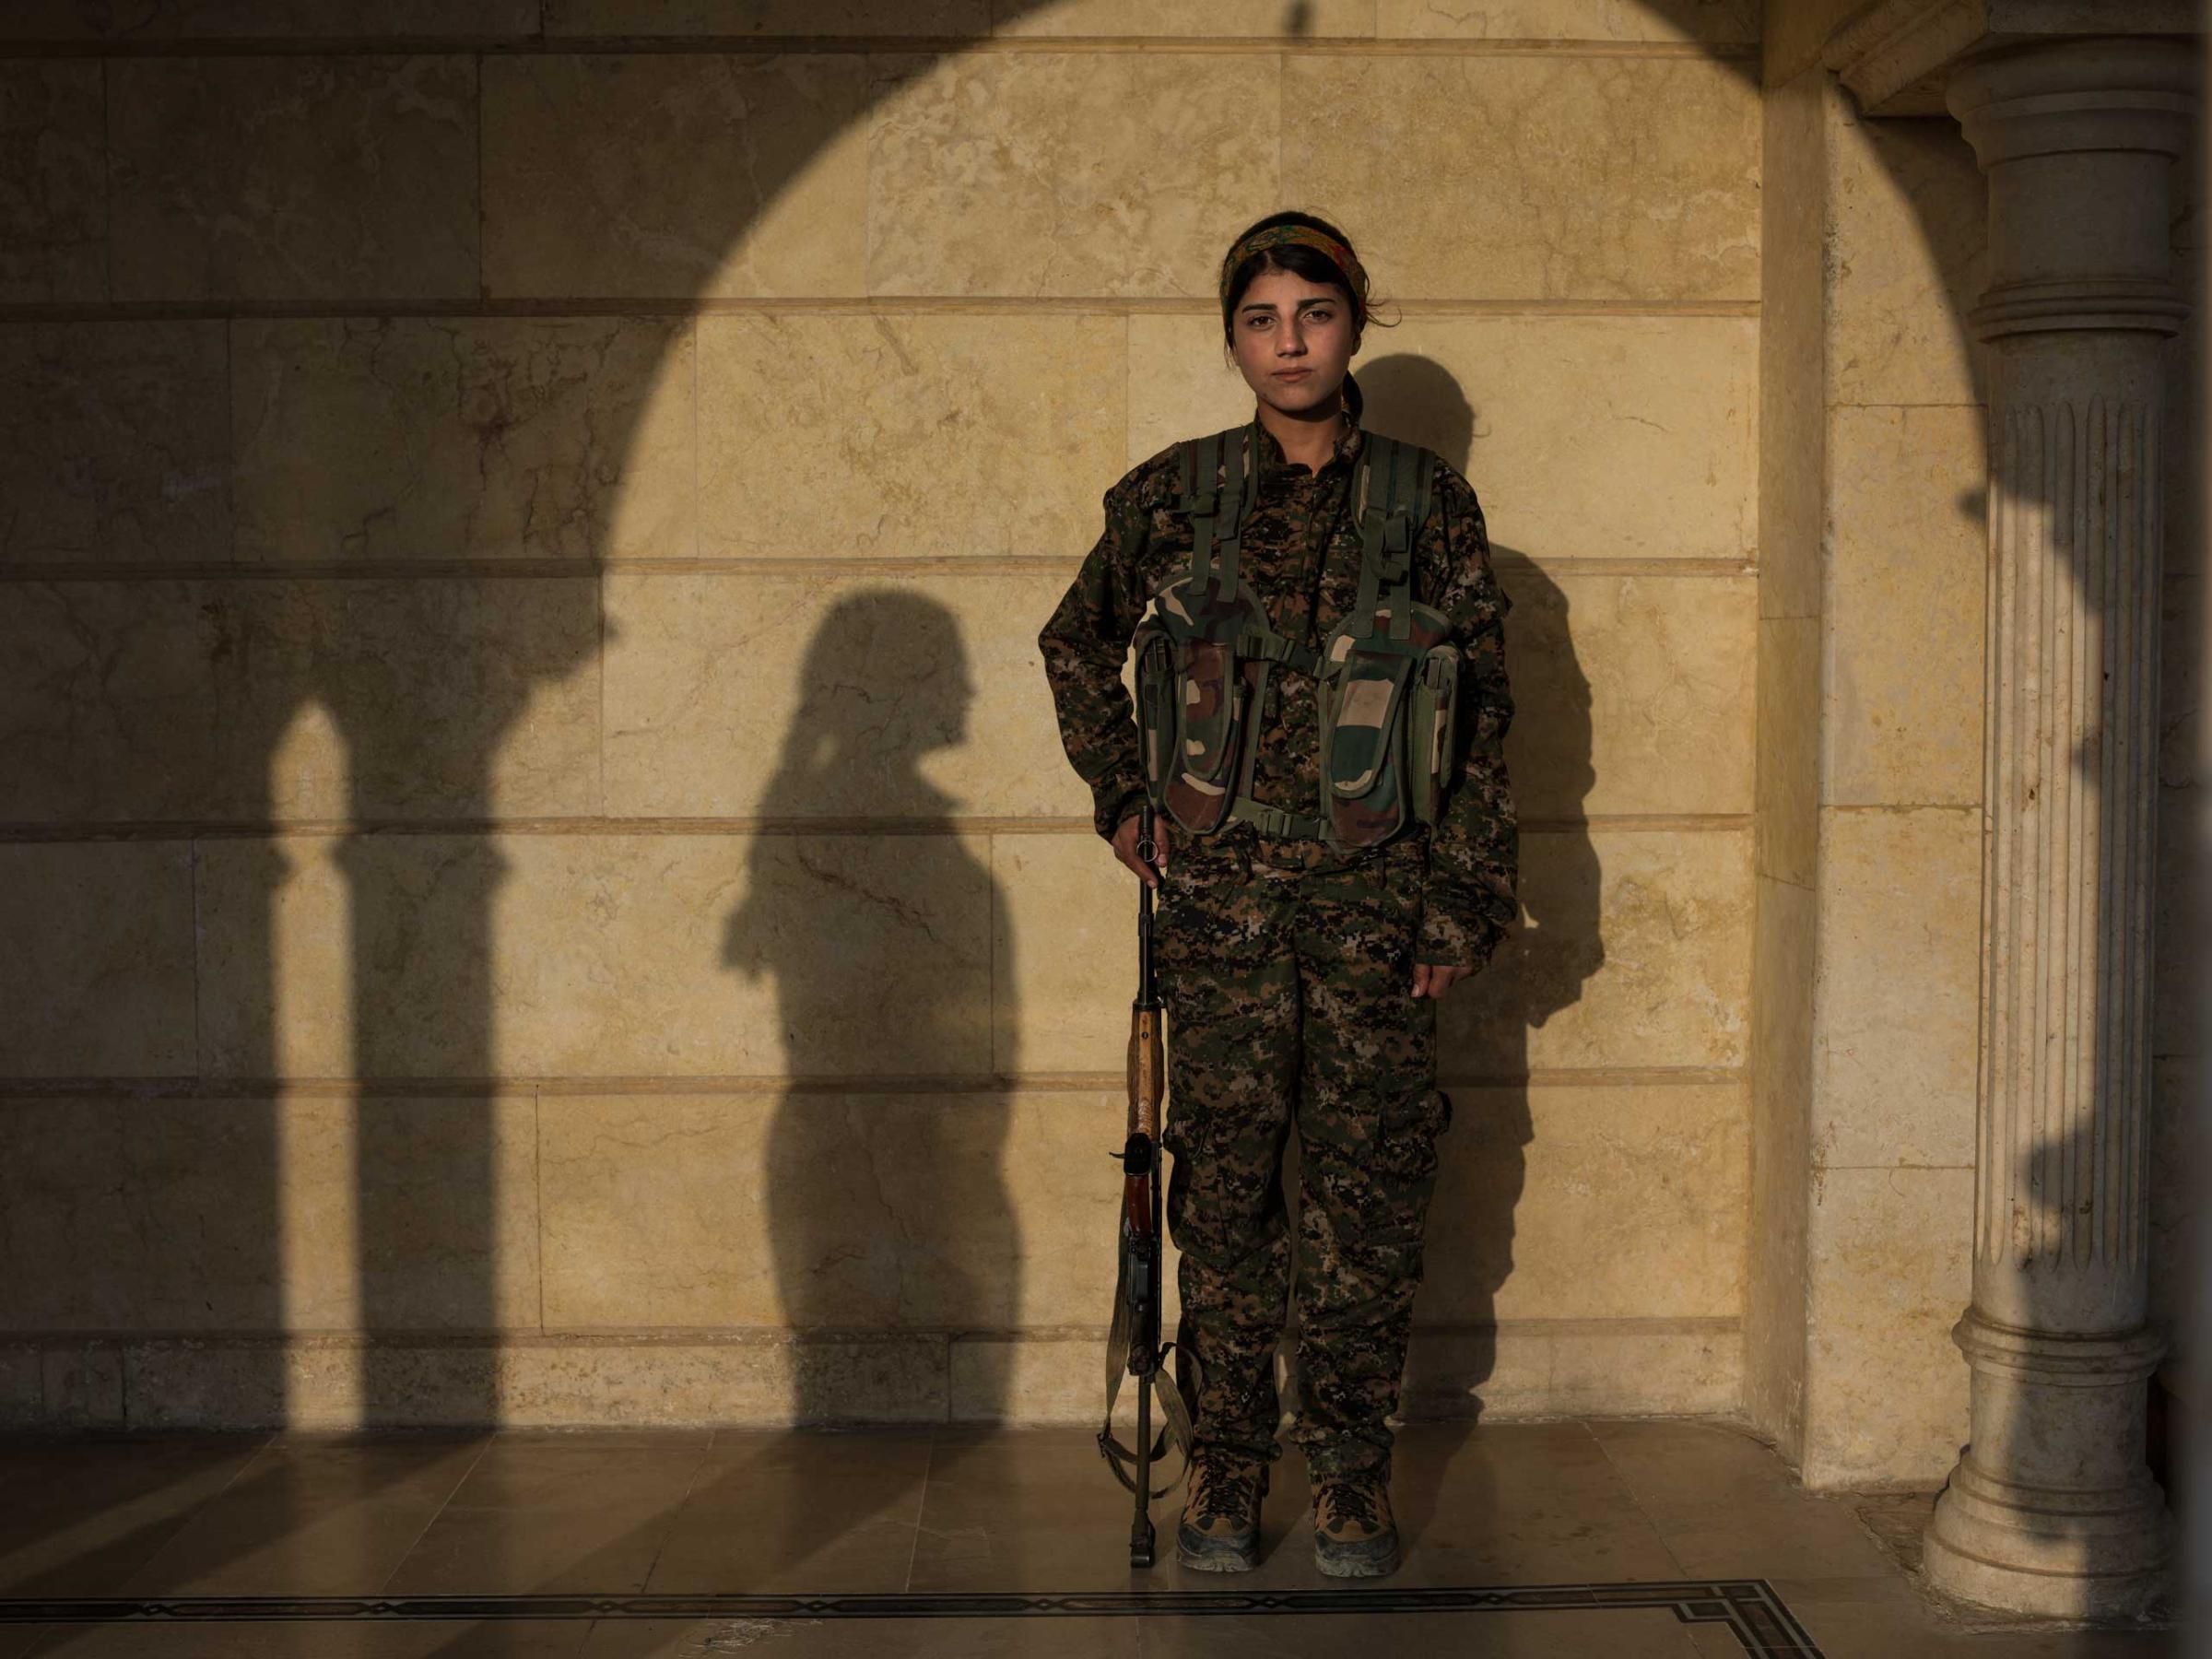 16 year-old YPJ fighter Barkhodan Kochar from Darbasi, Syria. "The war influenced me a lot. Before joining YPJ, whenever I asked my family about politics, they'd say 'that's not your business, you're just a girl'. But when I saw how the women of YPJ gave their lives for what they believed in, I knew that I wanted to be one of them." Newsha Tavakolian for TIME "I joined YPJ in 2014, because I wanted to defend my homeland. The war influenced me a lot. Before joining YPJ, whenever I asked my family about politics, they'd say 'that's not your business, you're just a girl'. But when I saw how the women of YPJ gave their lives for what they believed in, I knew that I wanted to be one of them. I feel much more empowered as a woman now. As a 16-year-old girl, I think that I have a very important role in my country and I will keep on fighting until the last drop of my blood is shed."